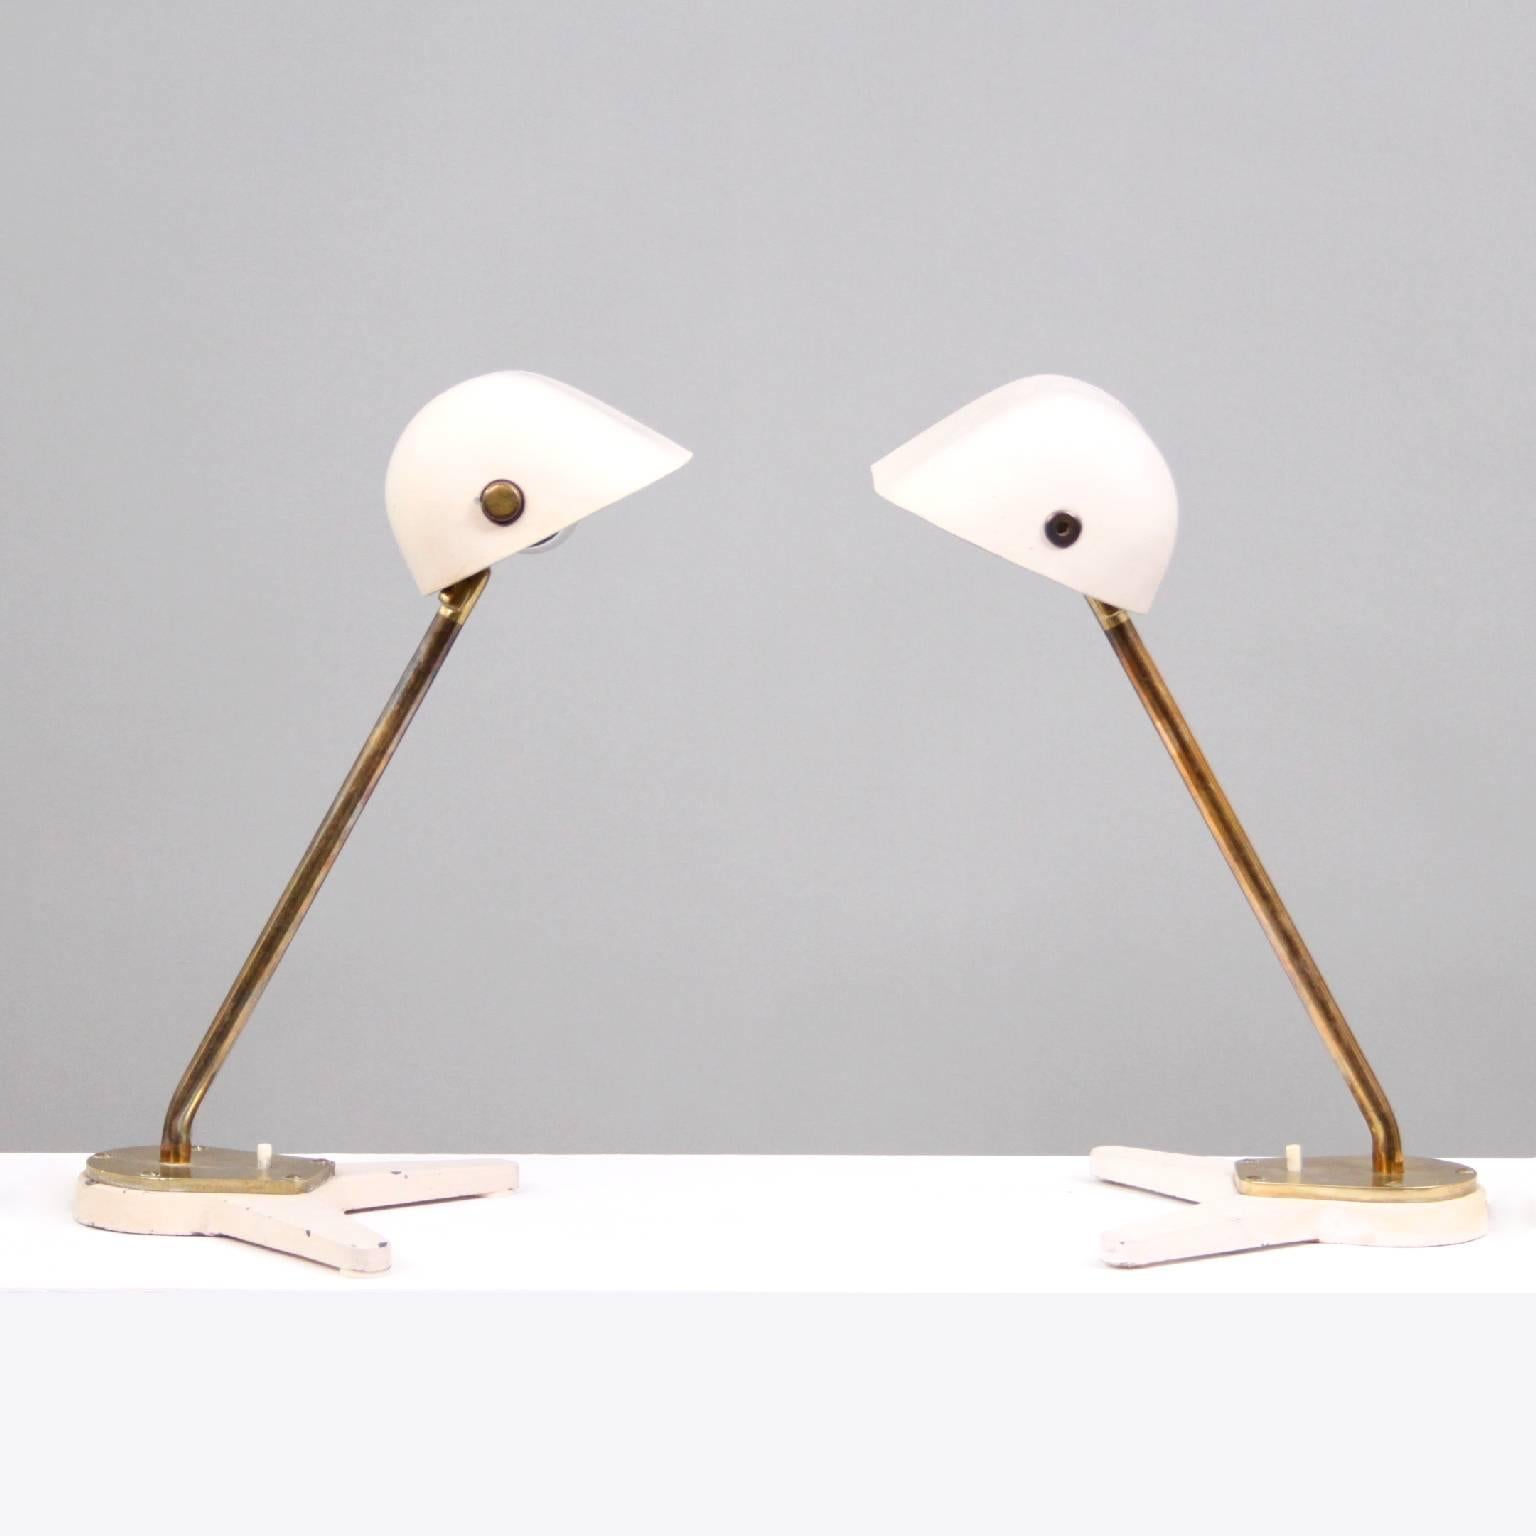 A rare pair of desk lamps designed by Arne Jacobsen & Hans J. Wegner for Aarhus City Hall, 1938-1941.

Original white lacquered adjustable shade and base, adjustable brass stem and foot, white bakelite push button switch. 

Manufactured 1940s by